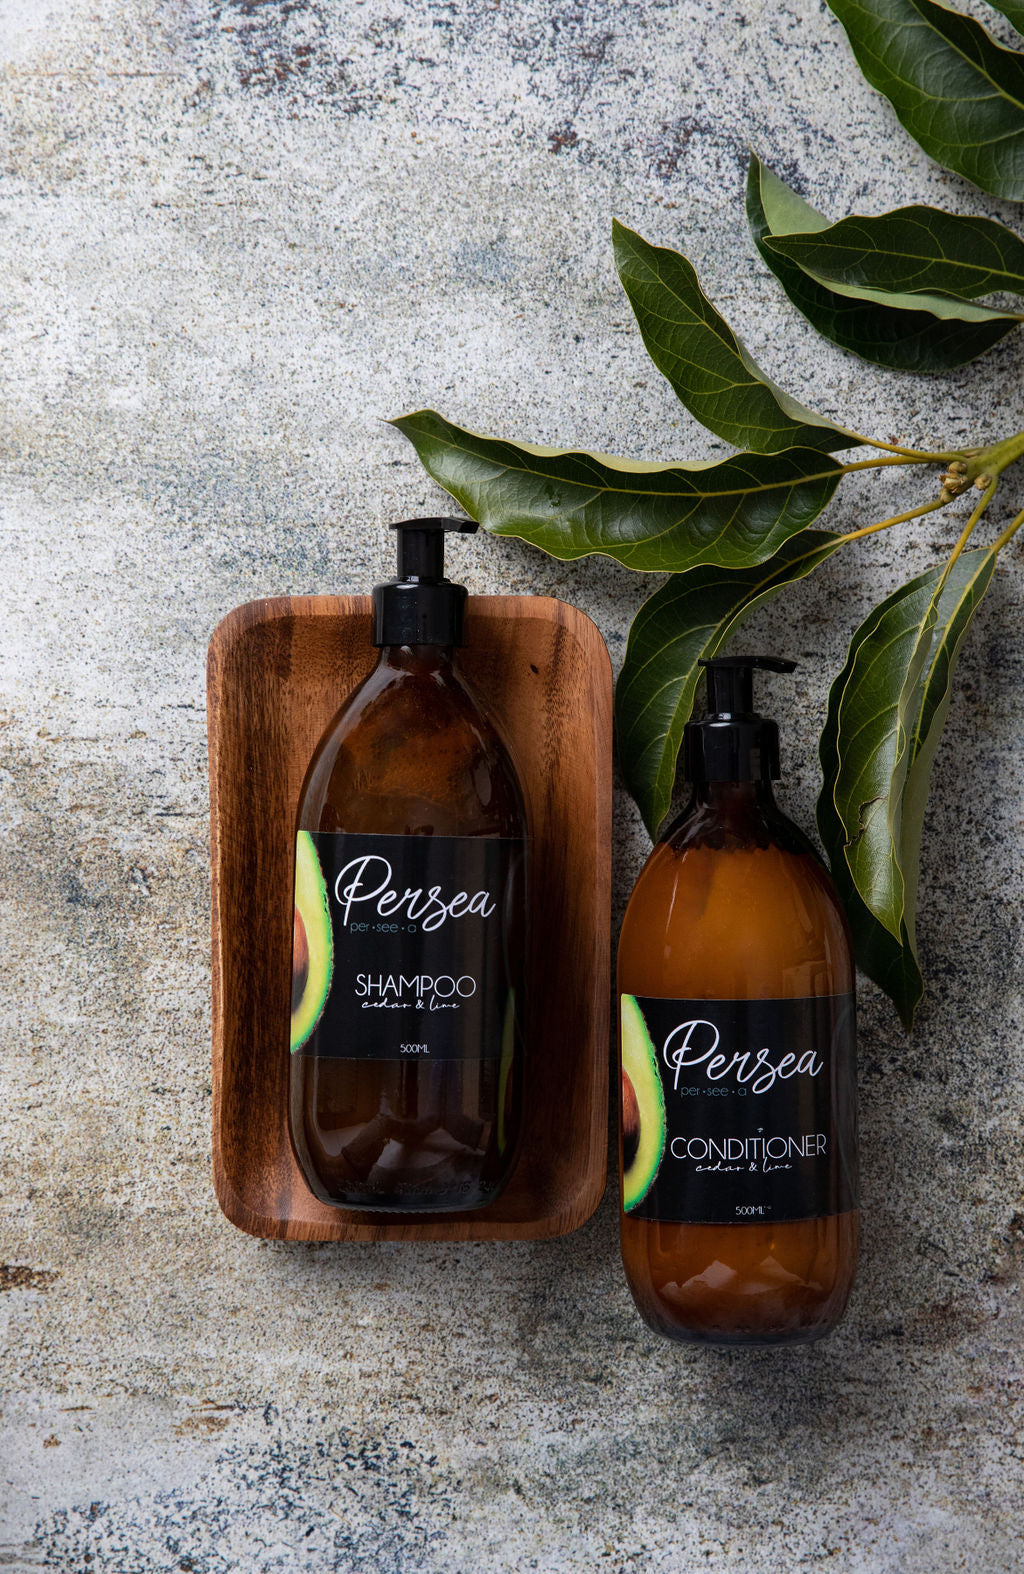 Persea Avo Conditioner. Cedar and Lime Scent. All Natural. Phosphate free. Good hair day!